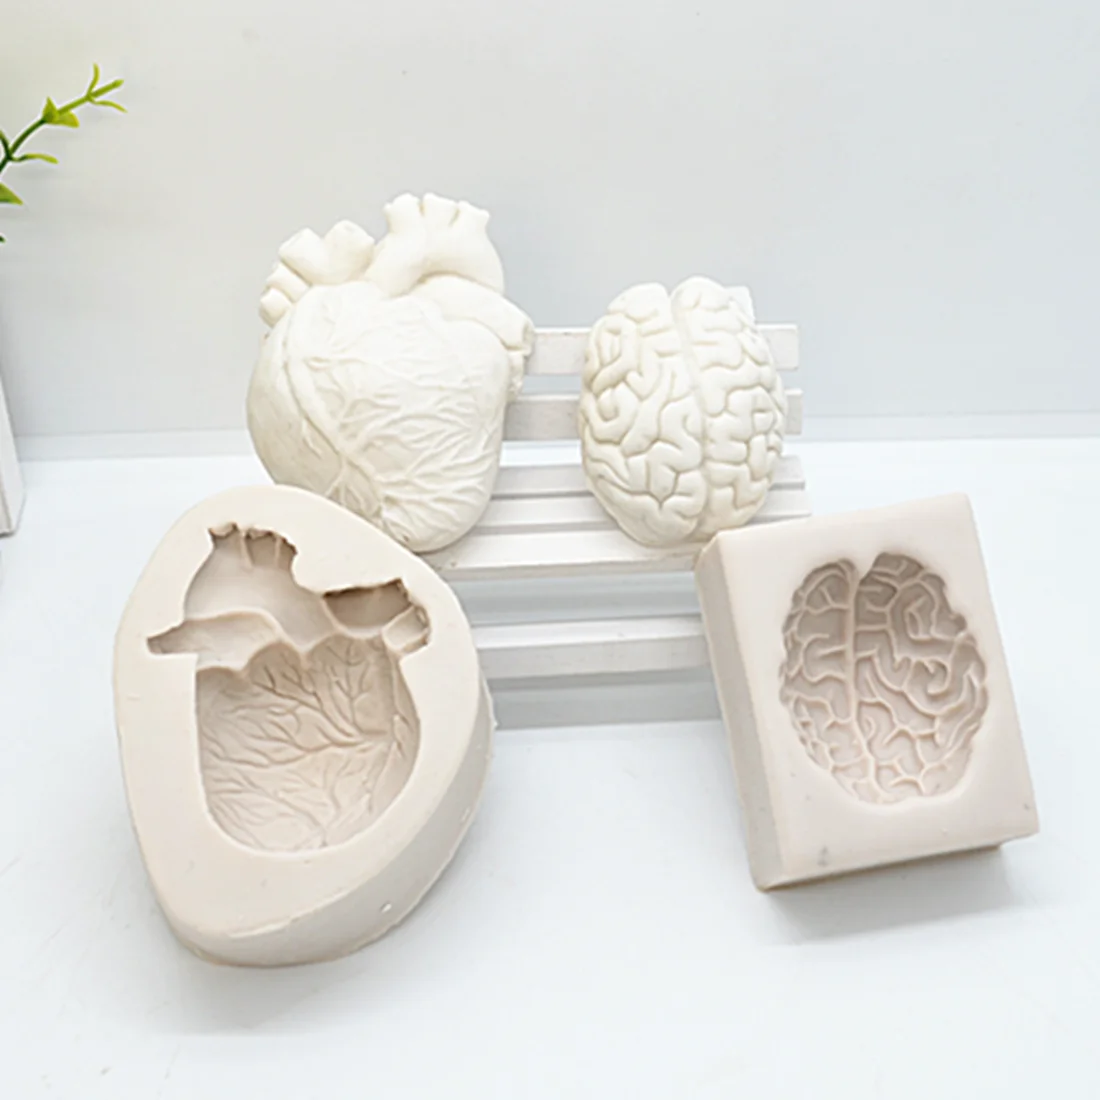 2pc 3D Heart And Brain Silicone Fondant Mold For Baking Cake Decorating Tools Cake Resin Molds Kitchen Baking Accessories FM2004